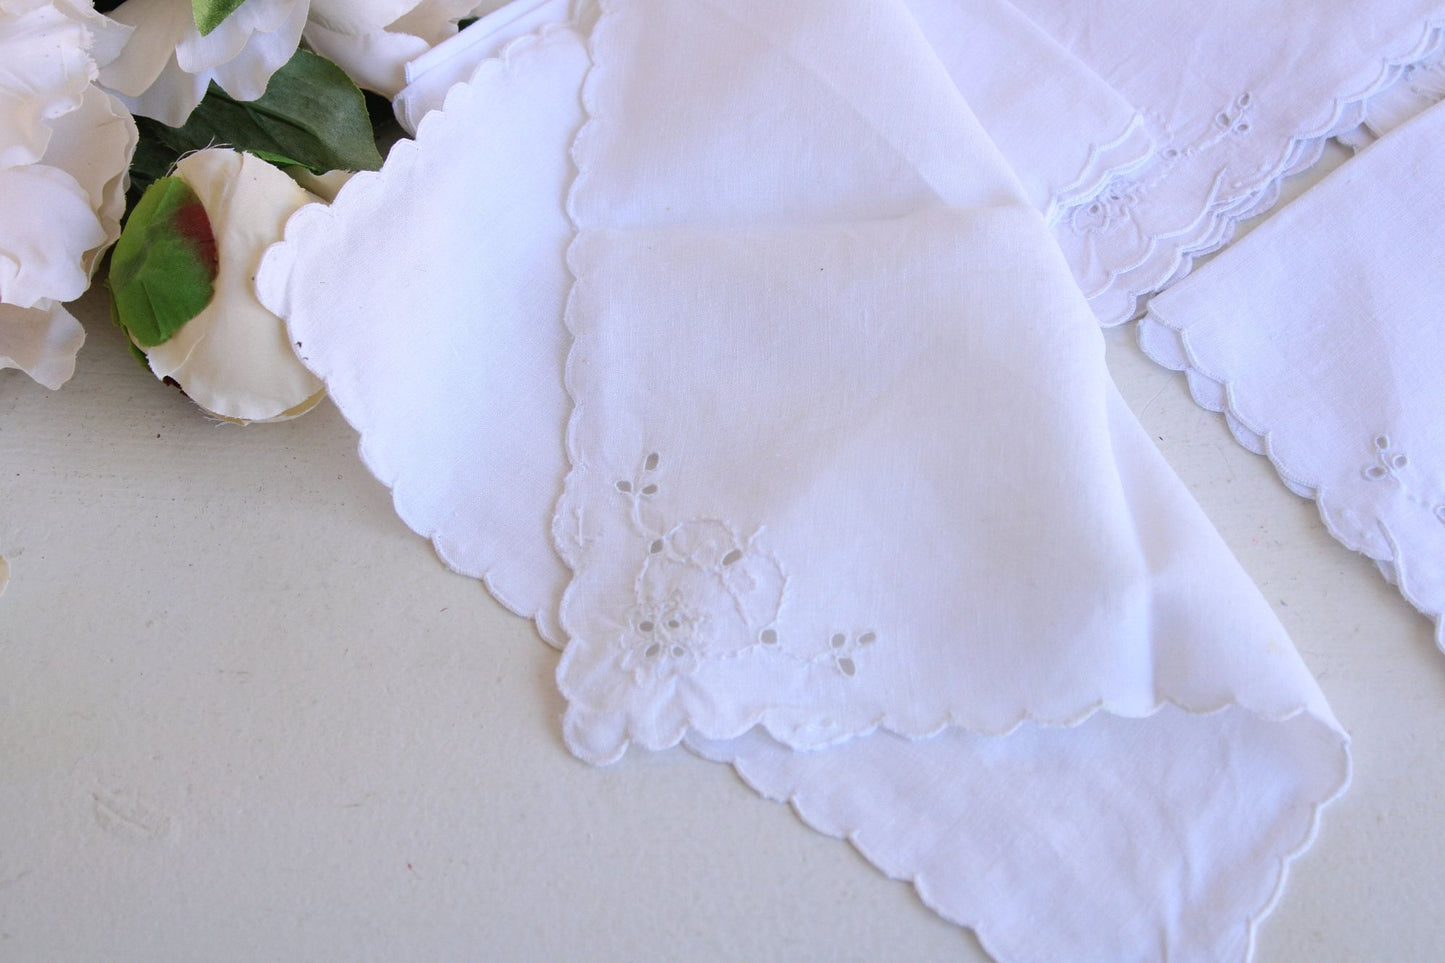 Vintage 1940s Napkins, Set of Five, White Linen Embroidered with Flowers